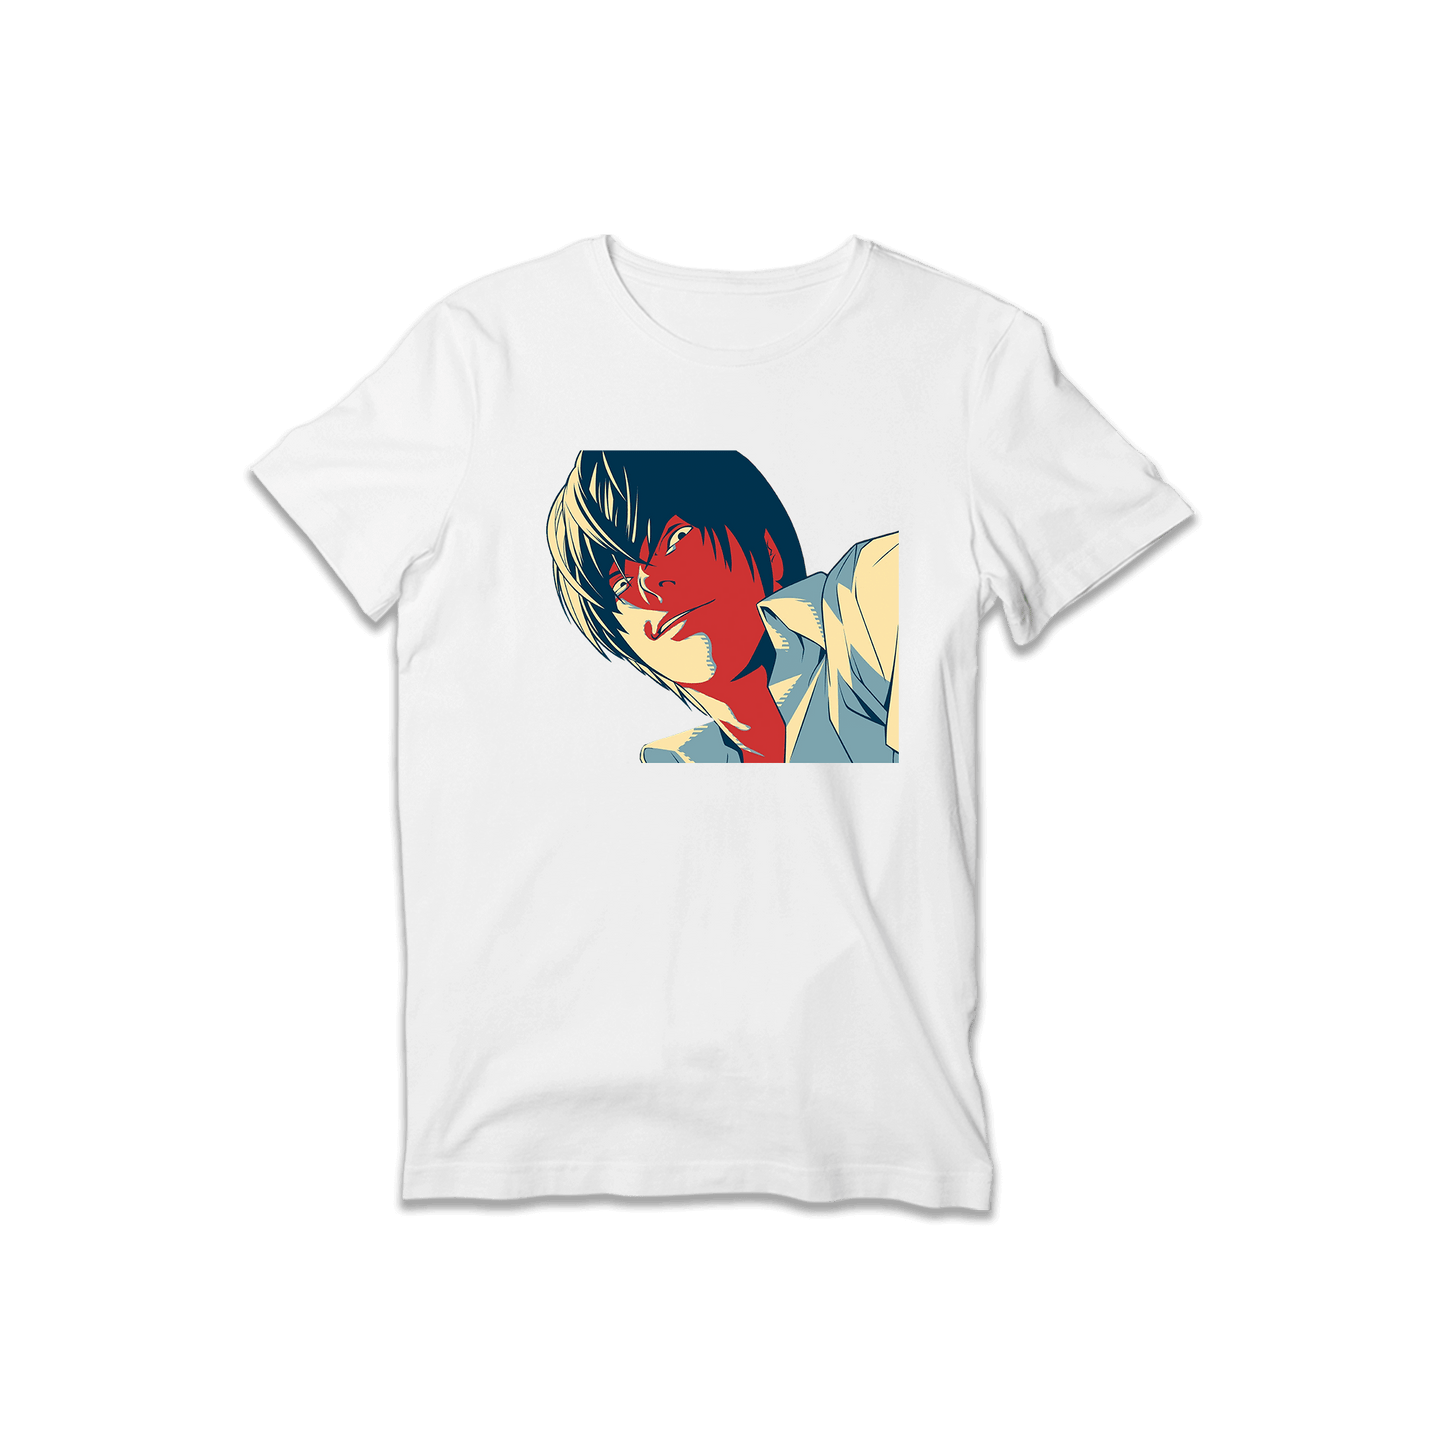 Light Yagami Death Note T-shirt